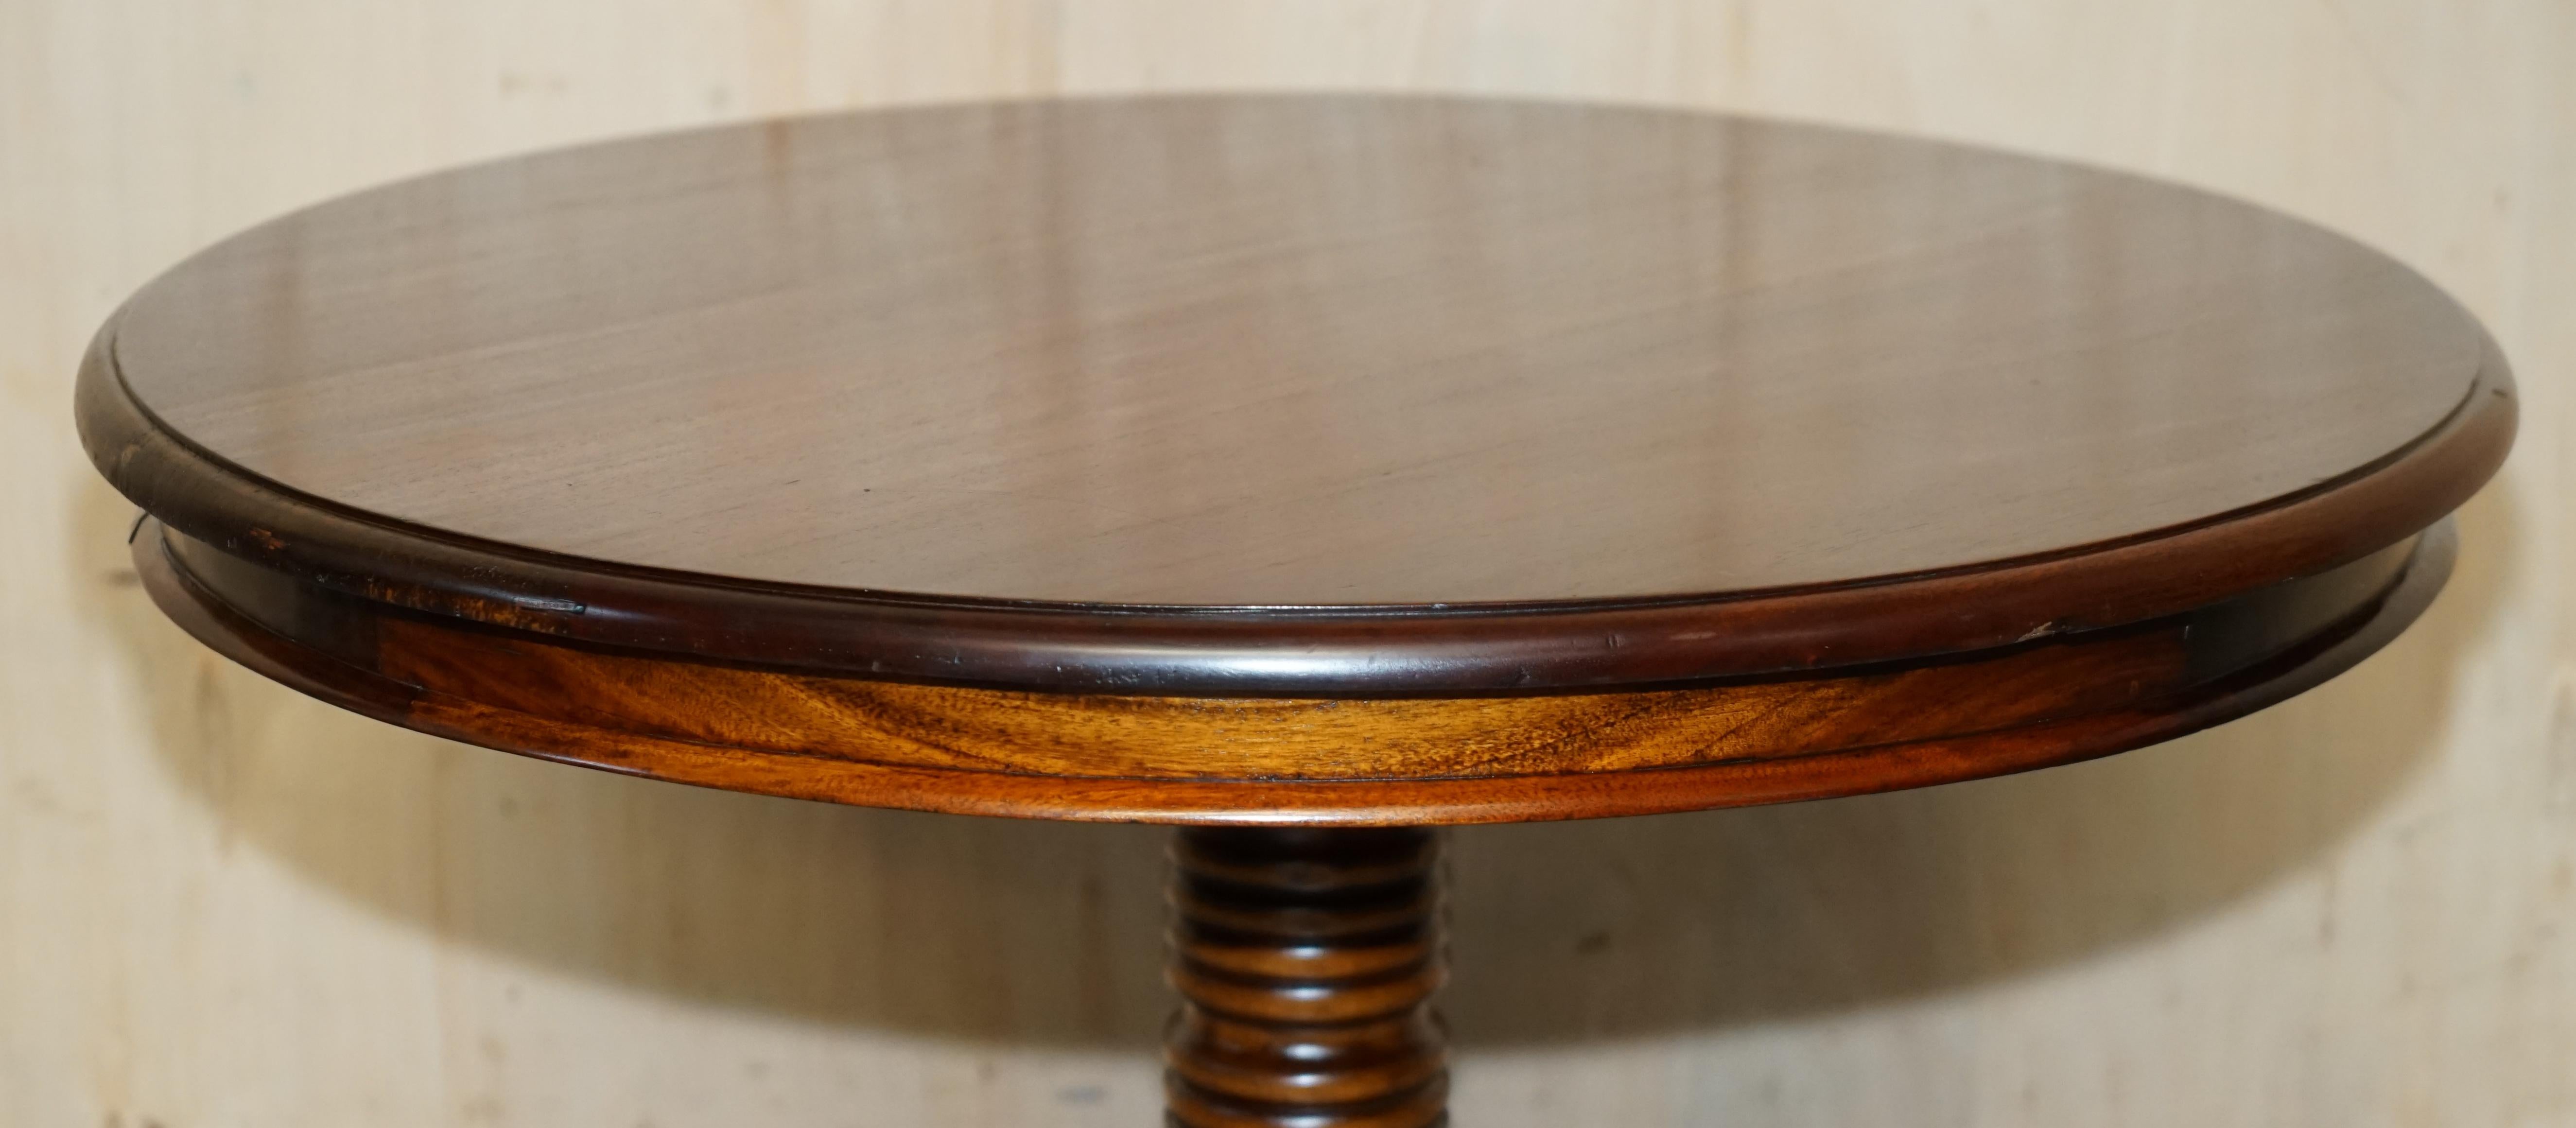 We are delighted to offer for sale this very nice, solid mahogany, extra large side table or small centre table.

A good looking and well made table, ideally suited as a very large side table as mentioned, or a good round coffee table which was